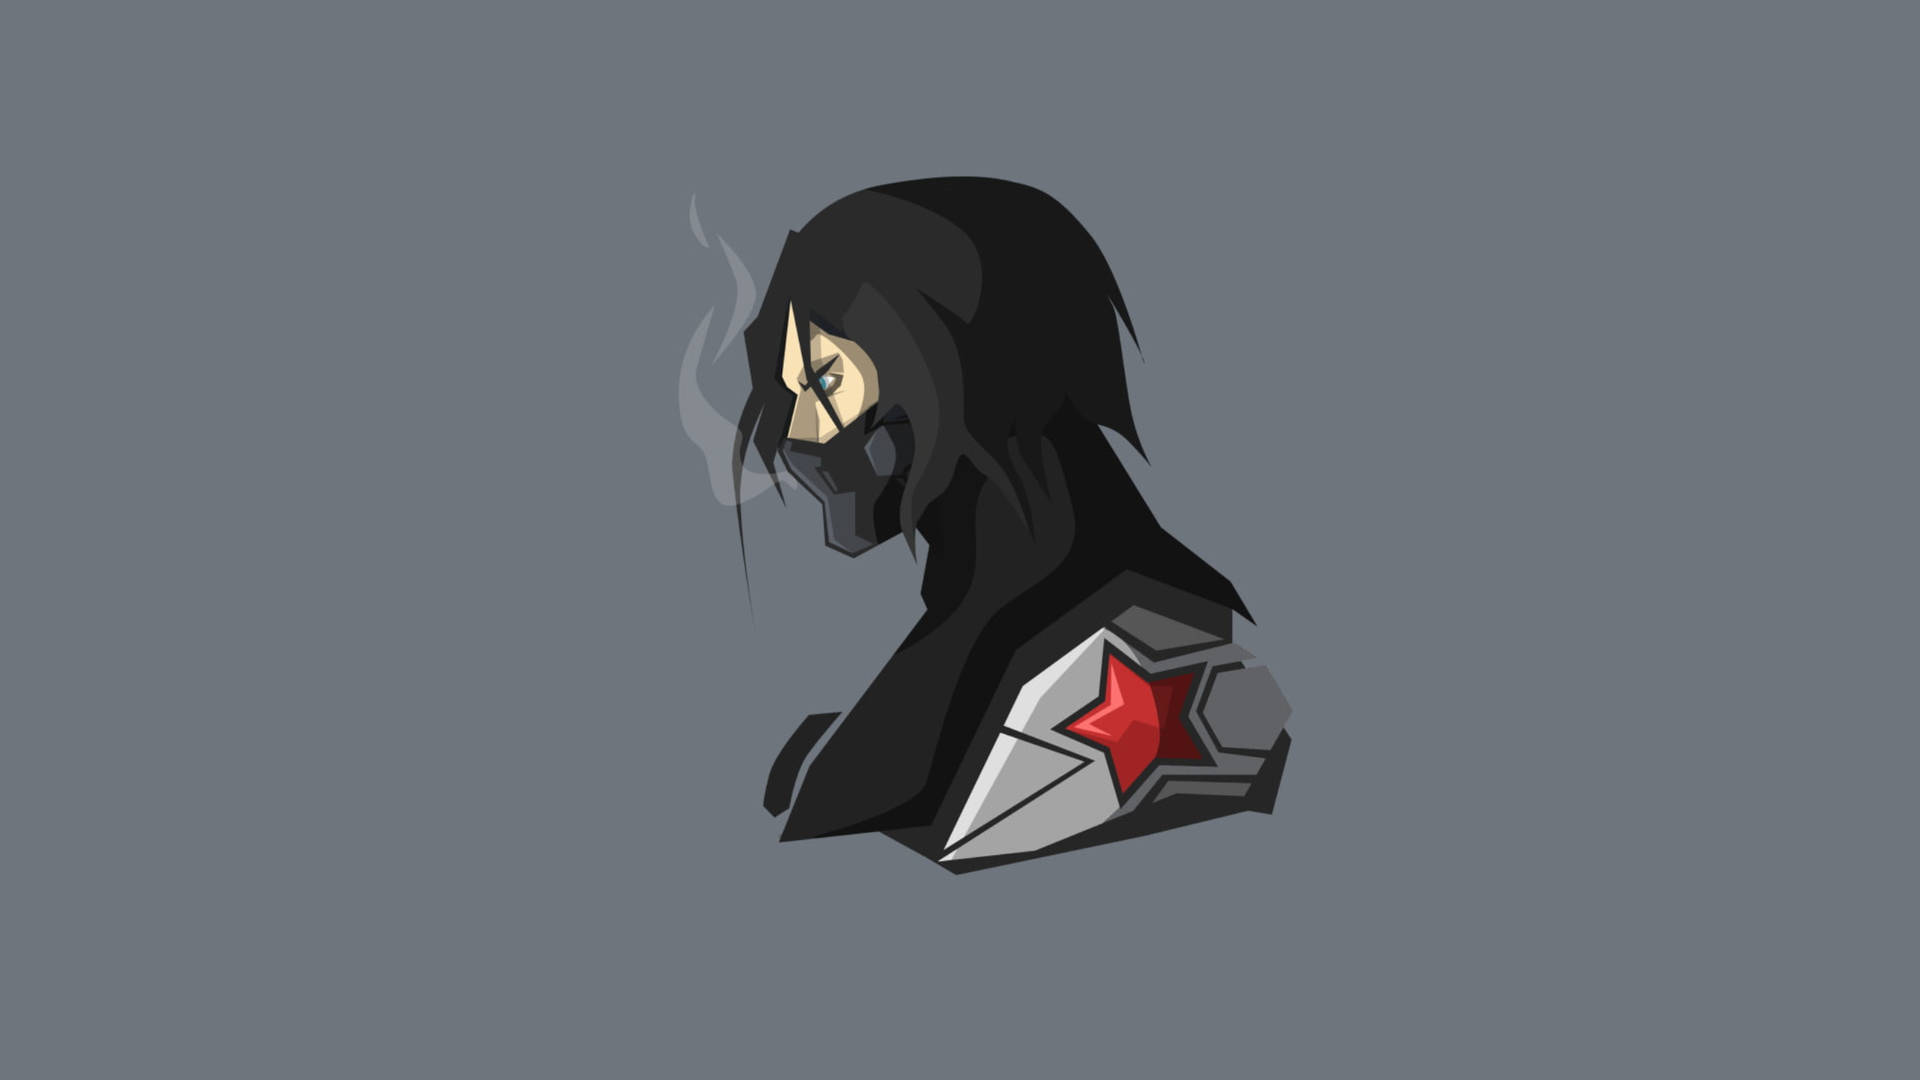 Anime Winter Soldier In Gray Wallpaper